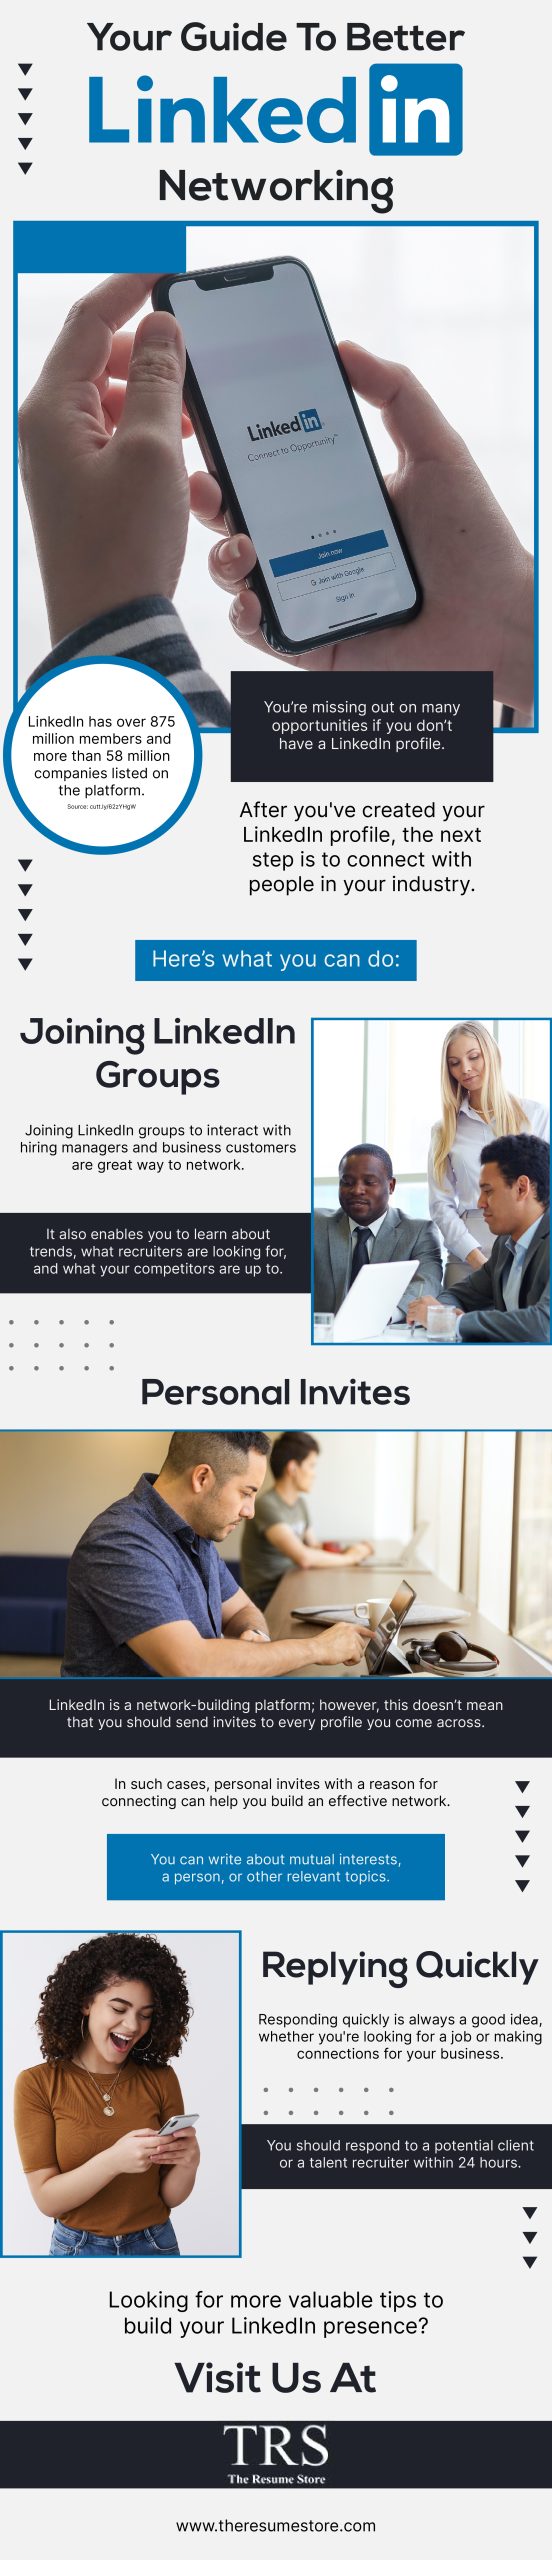 Your Guide to better LInkedIn Networking